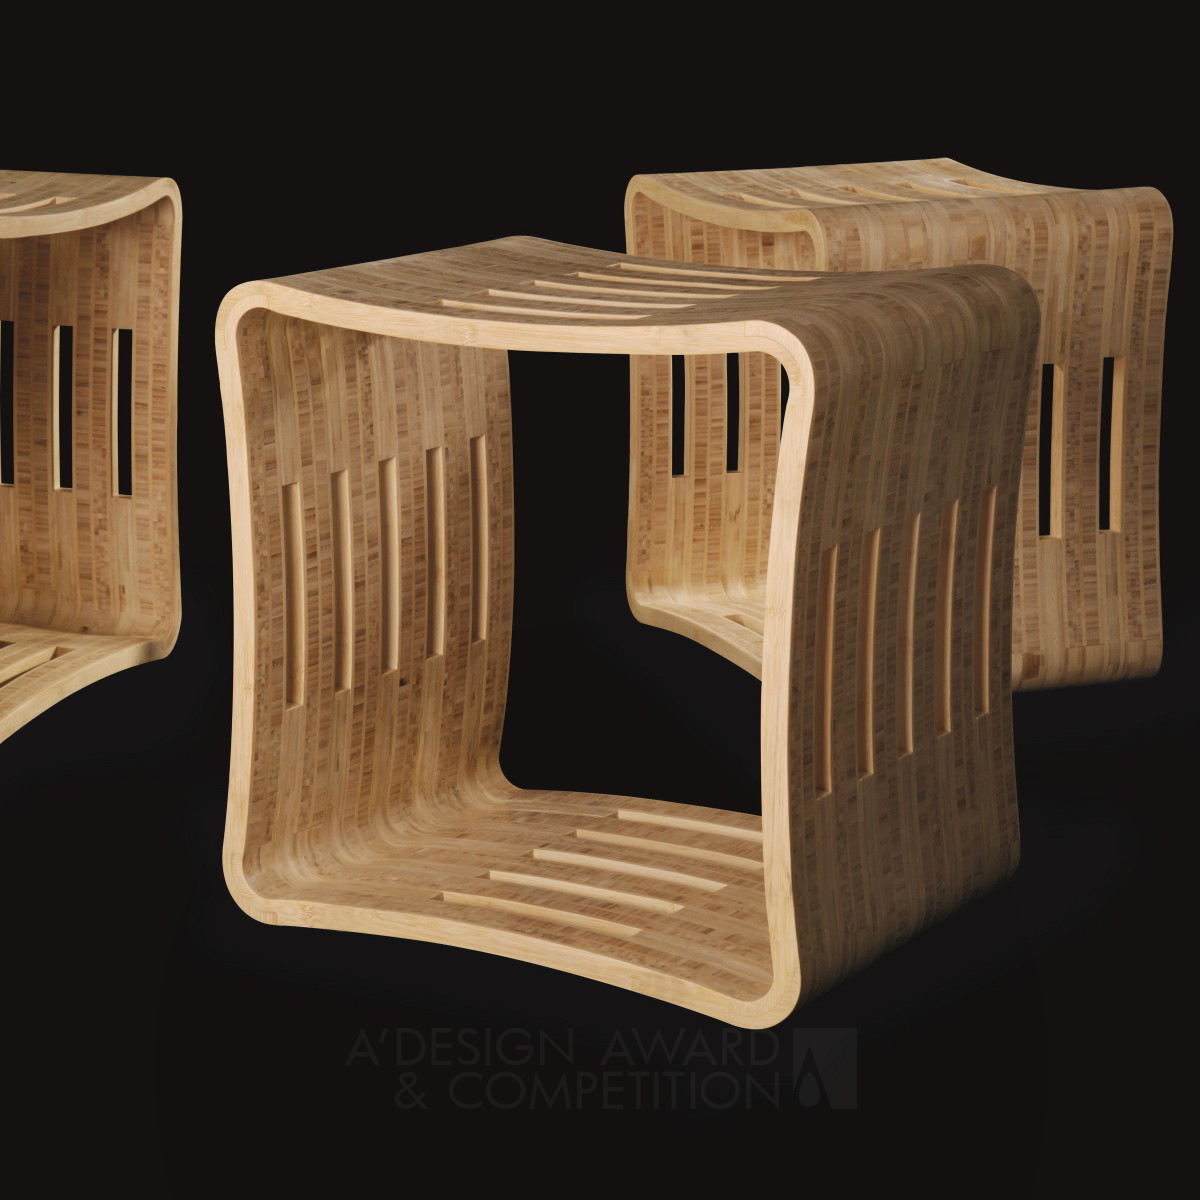 Costello Seat by Kent Gration